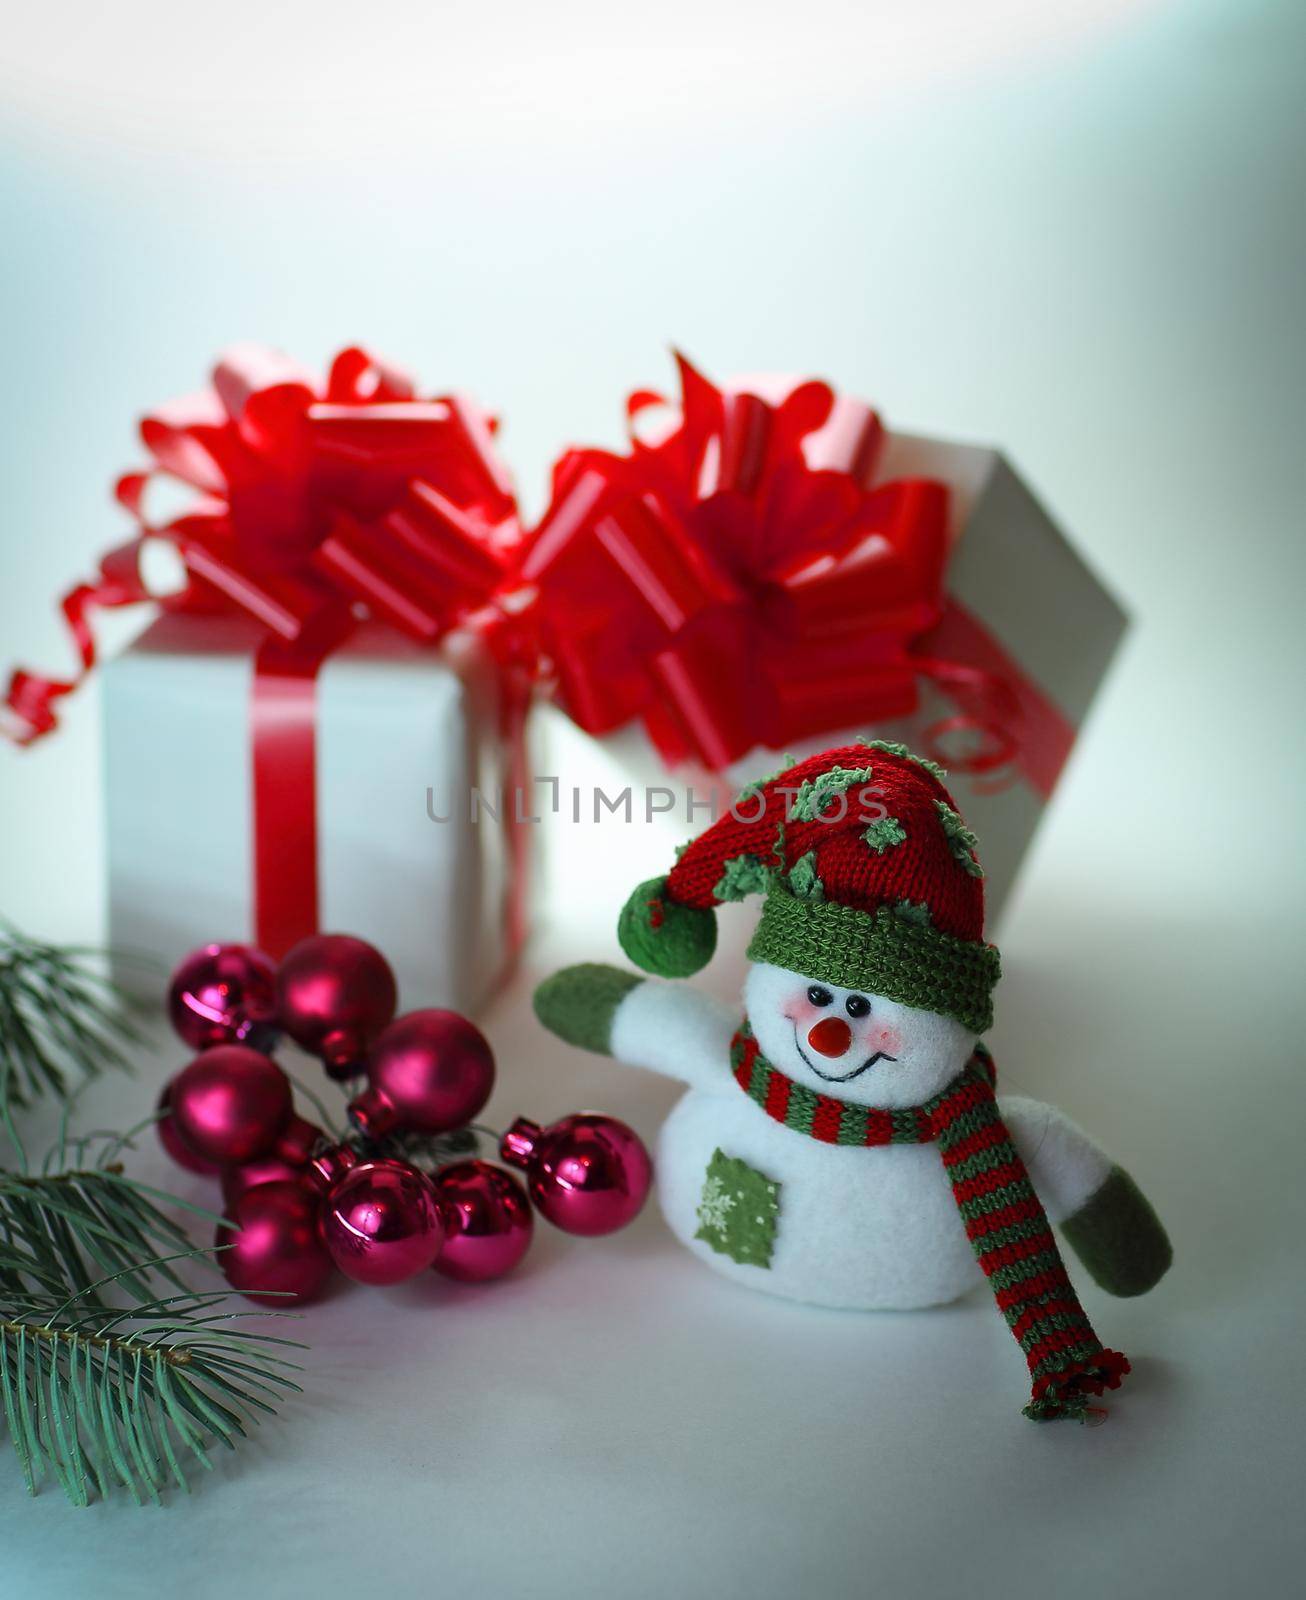 snowman , Christmas balls and gifts .isolated on white background .photo with copy space